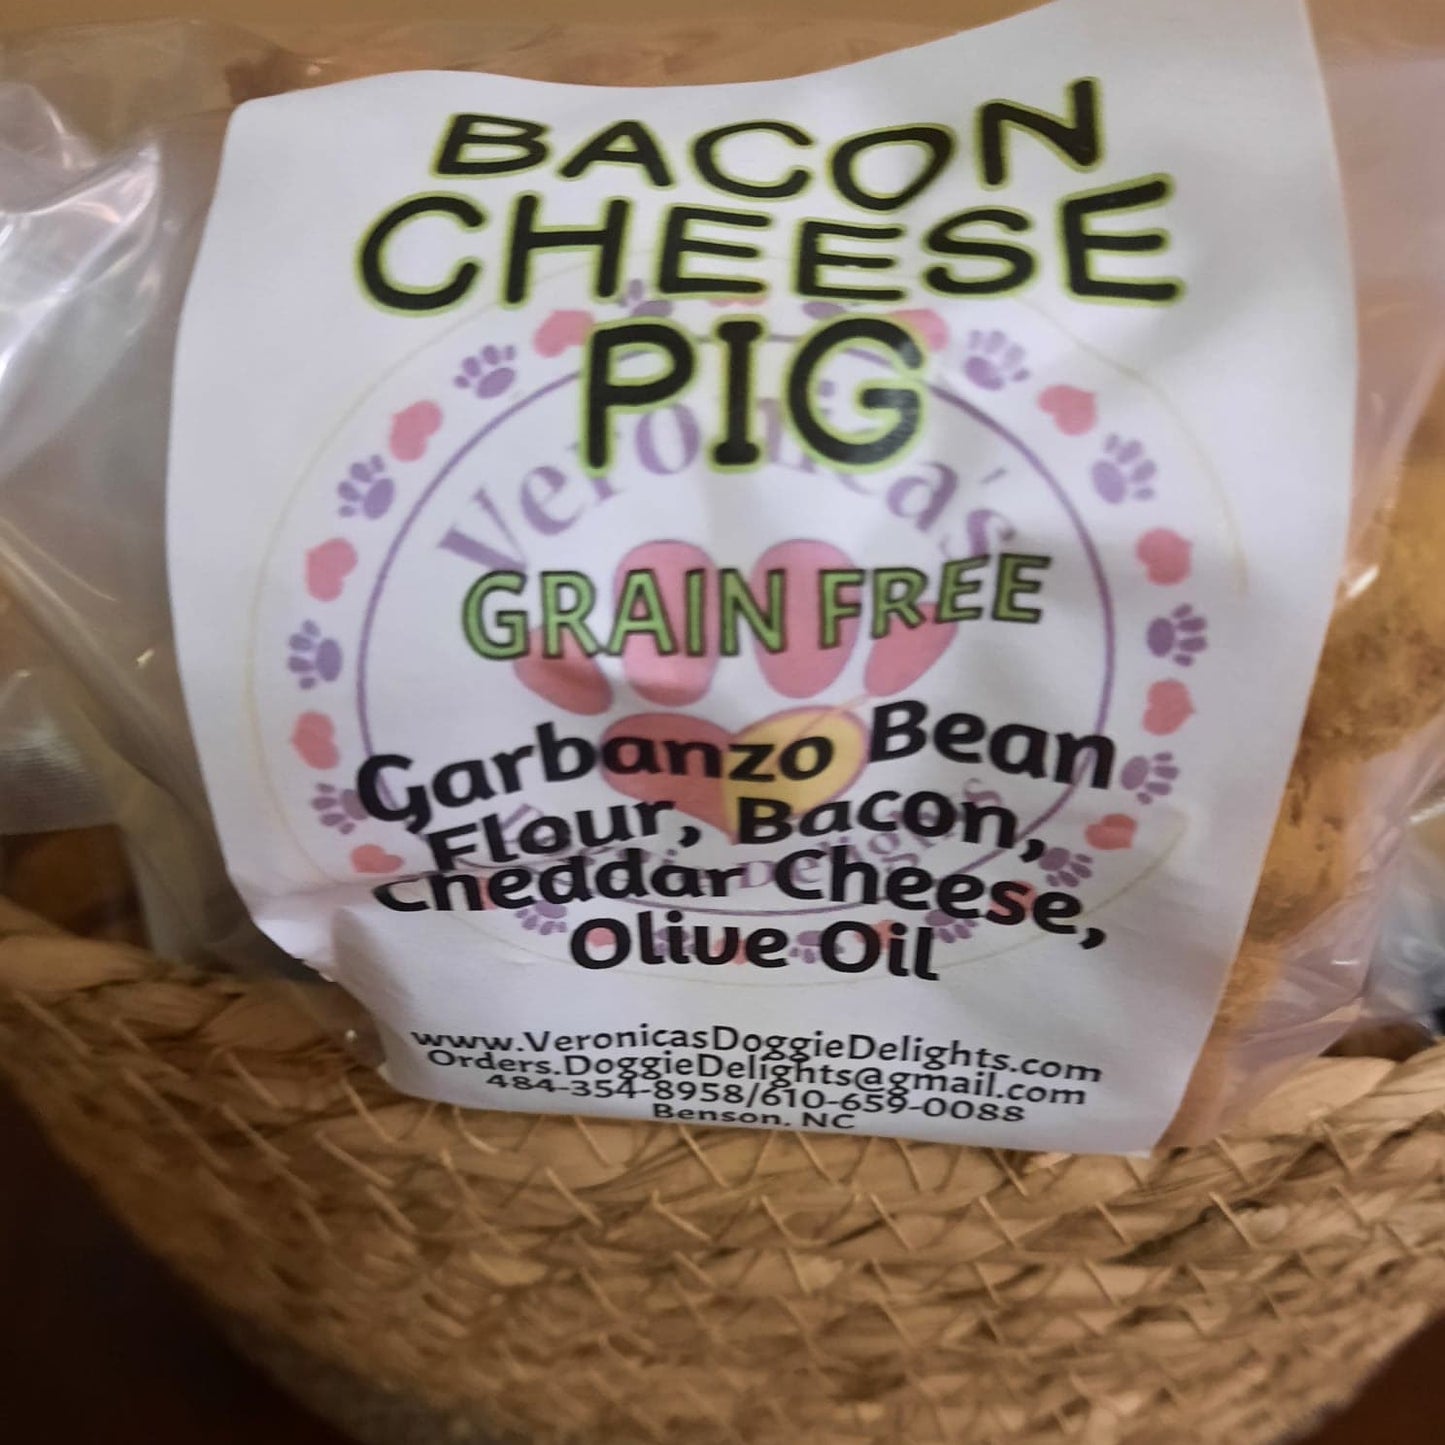 Bacon Cheese Pig (4-pack Pig shape) - Grain Free